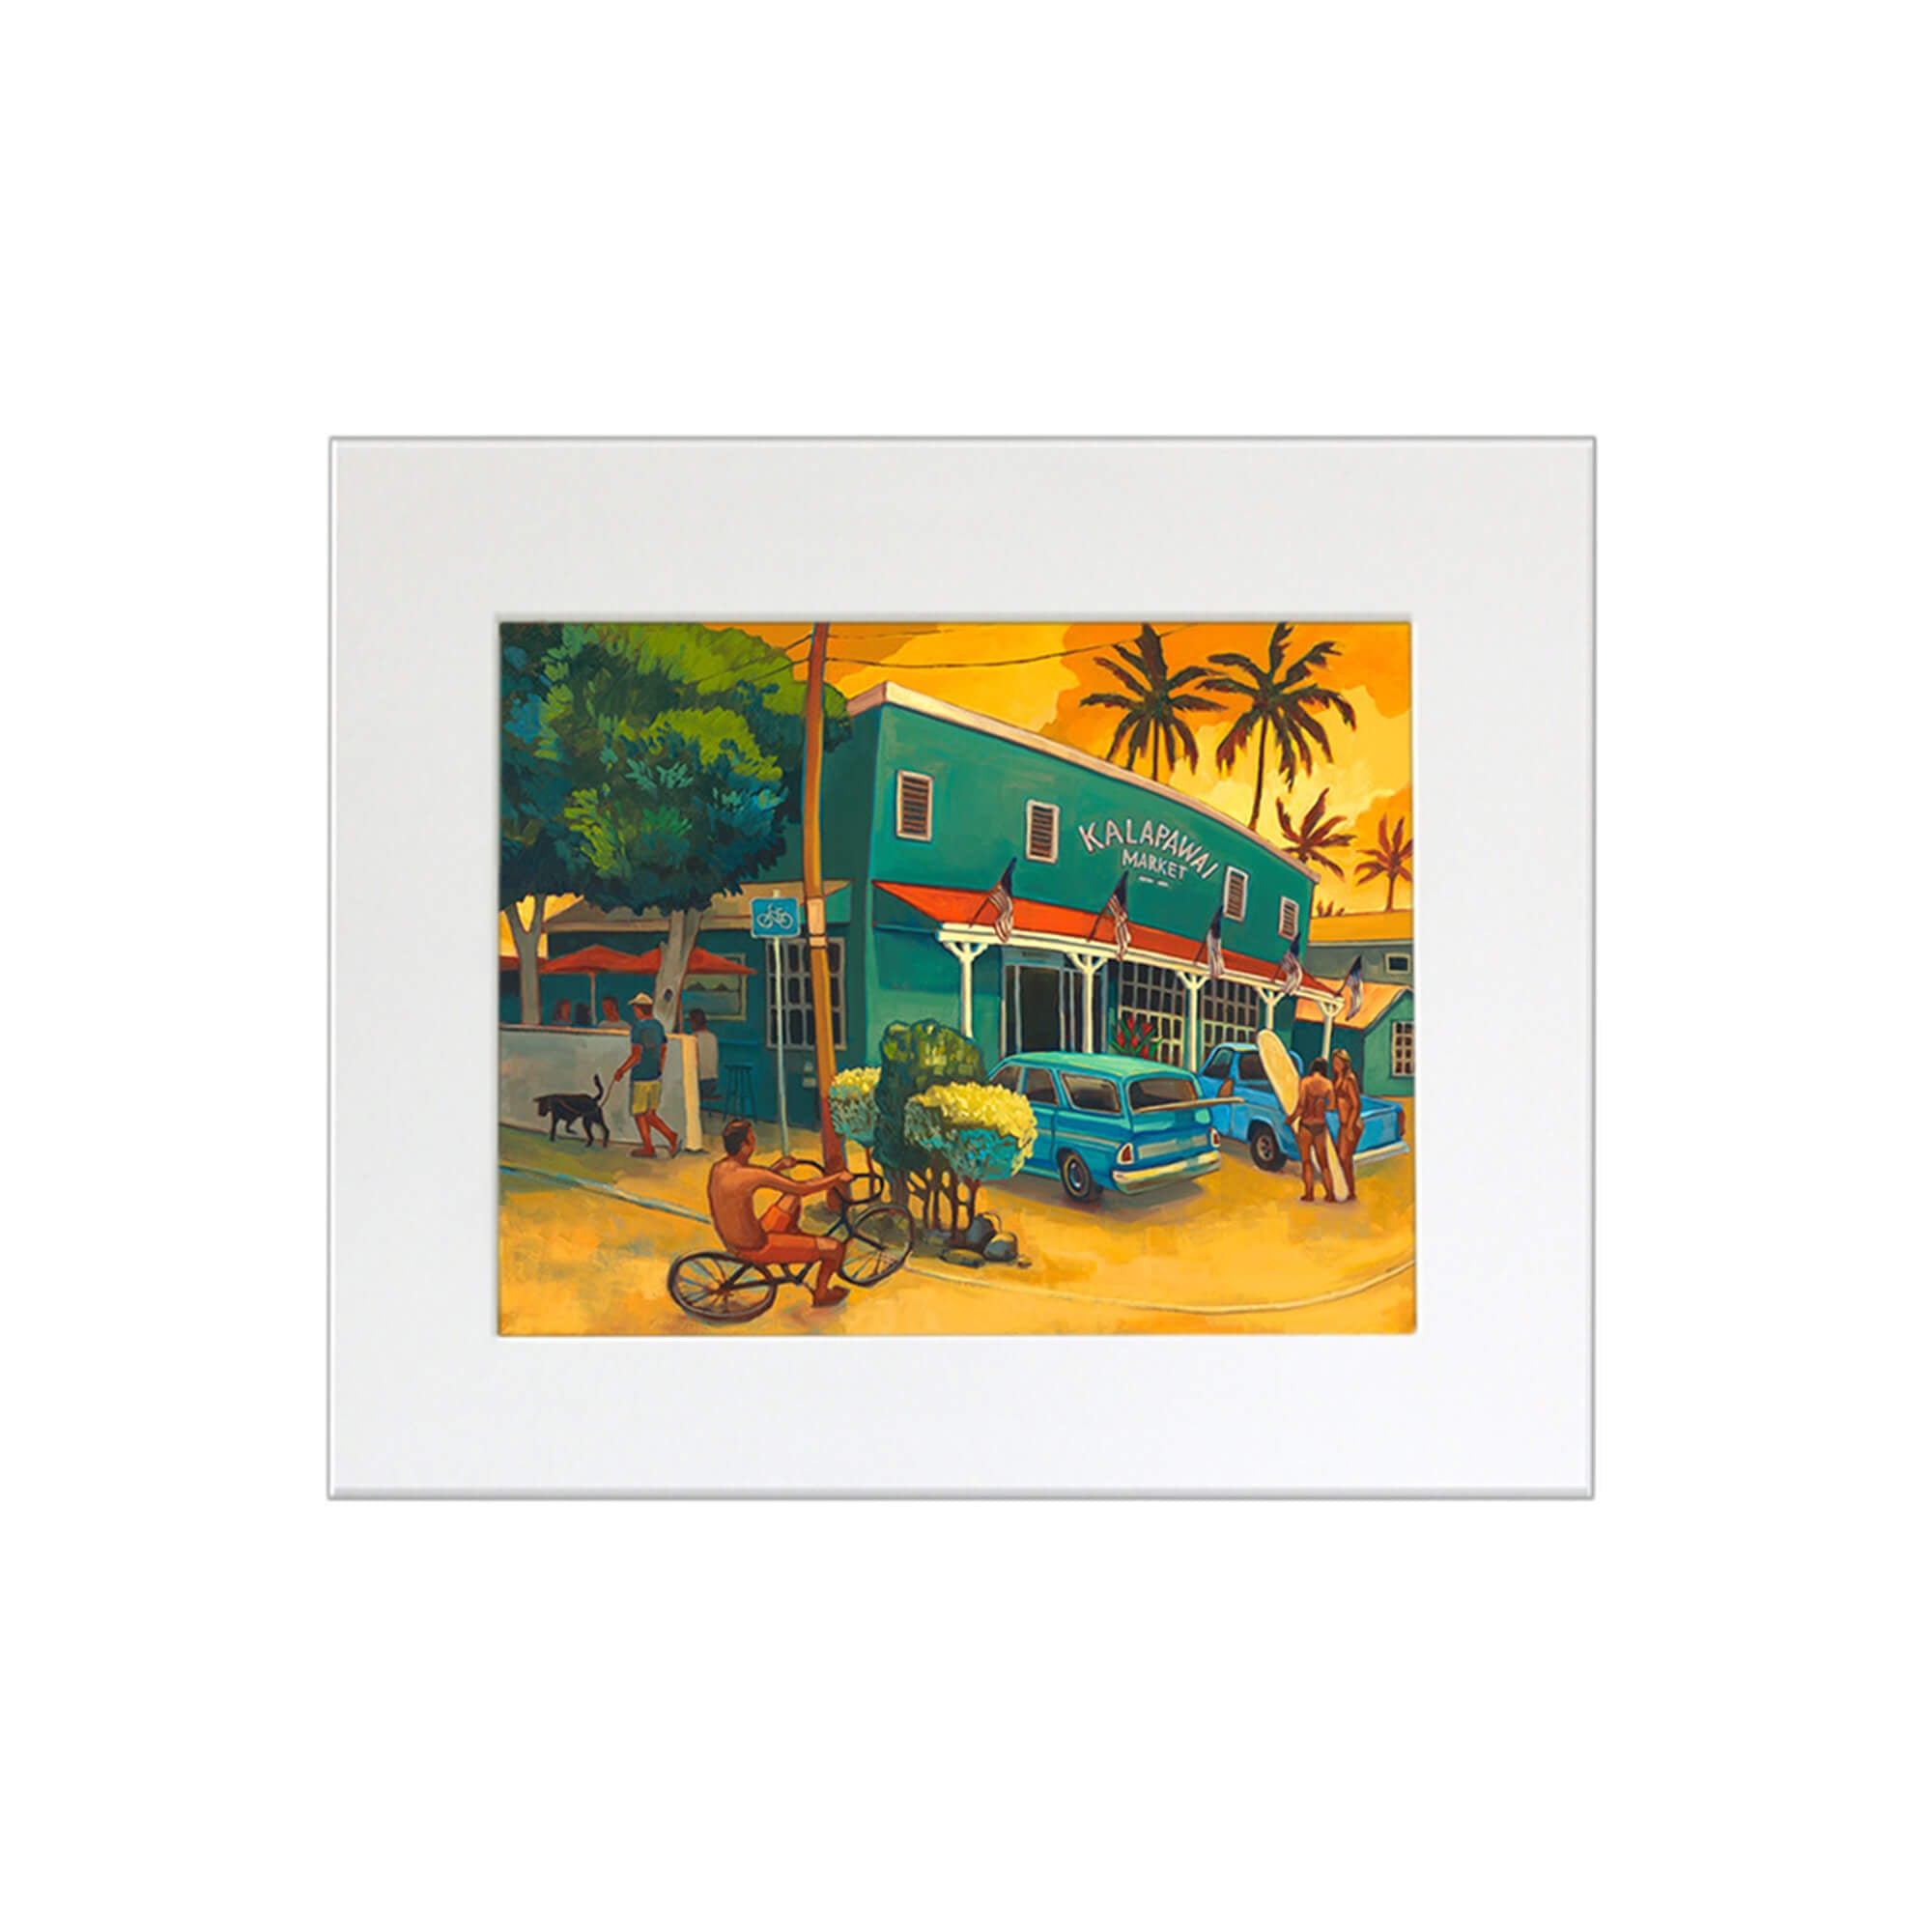 Kalapawaii market with people around by Hawaii artist Colin Redican